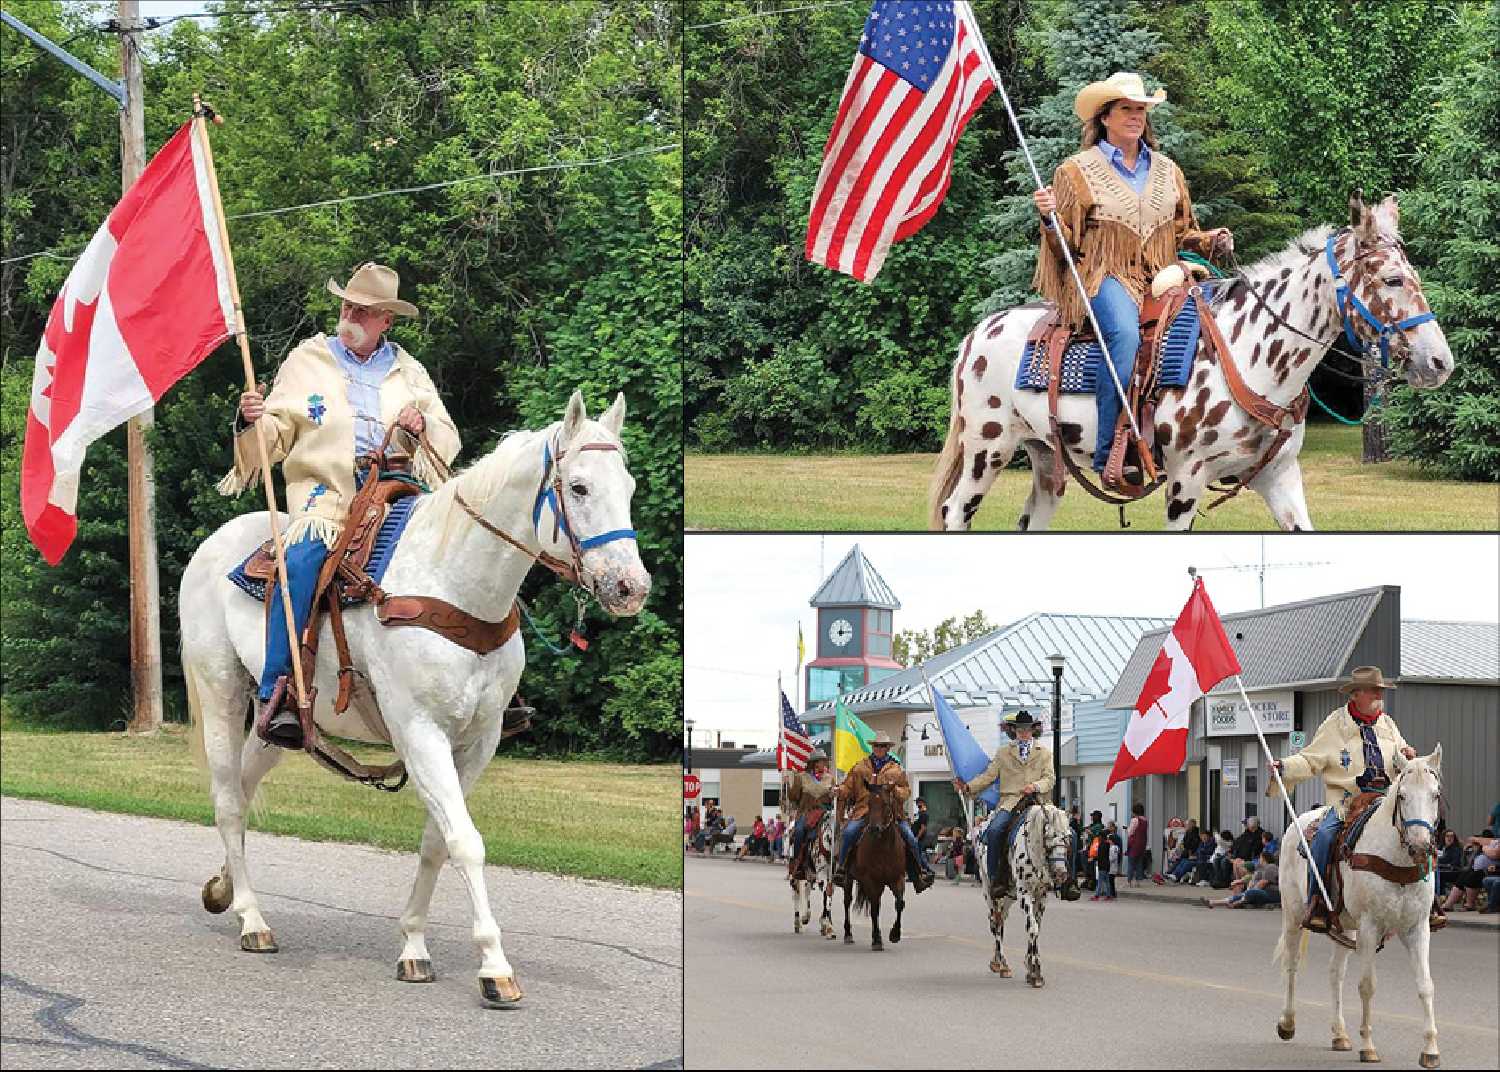 Doug Sauter of Fairlight will be waving the Canadian flag and riding one of his appaloosa horses to lead the Moosomin Parade.